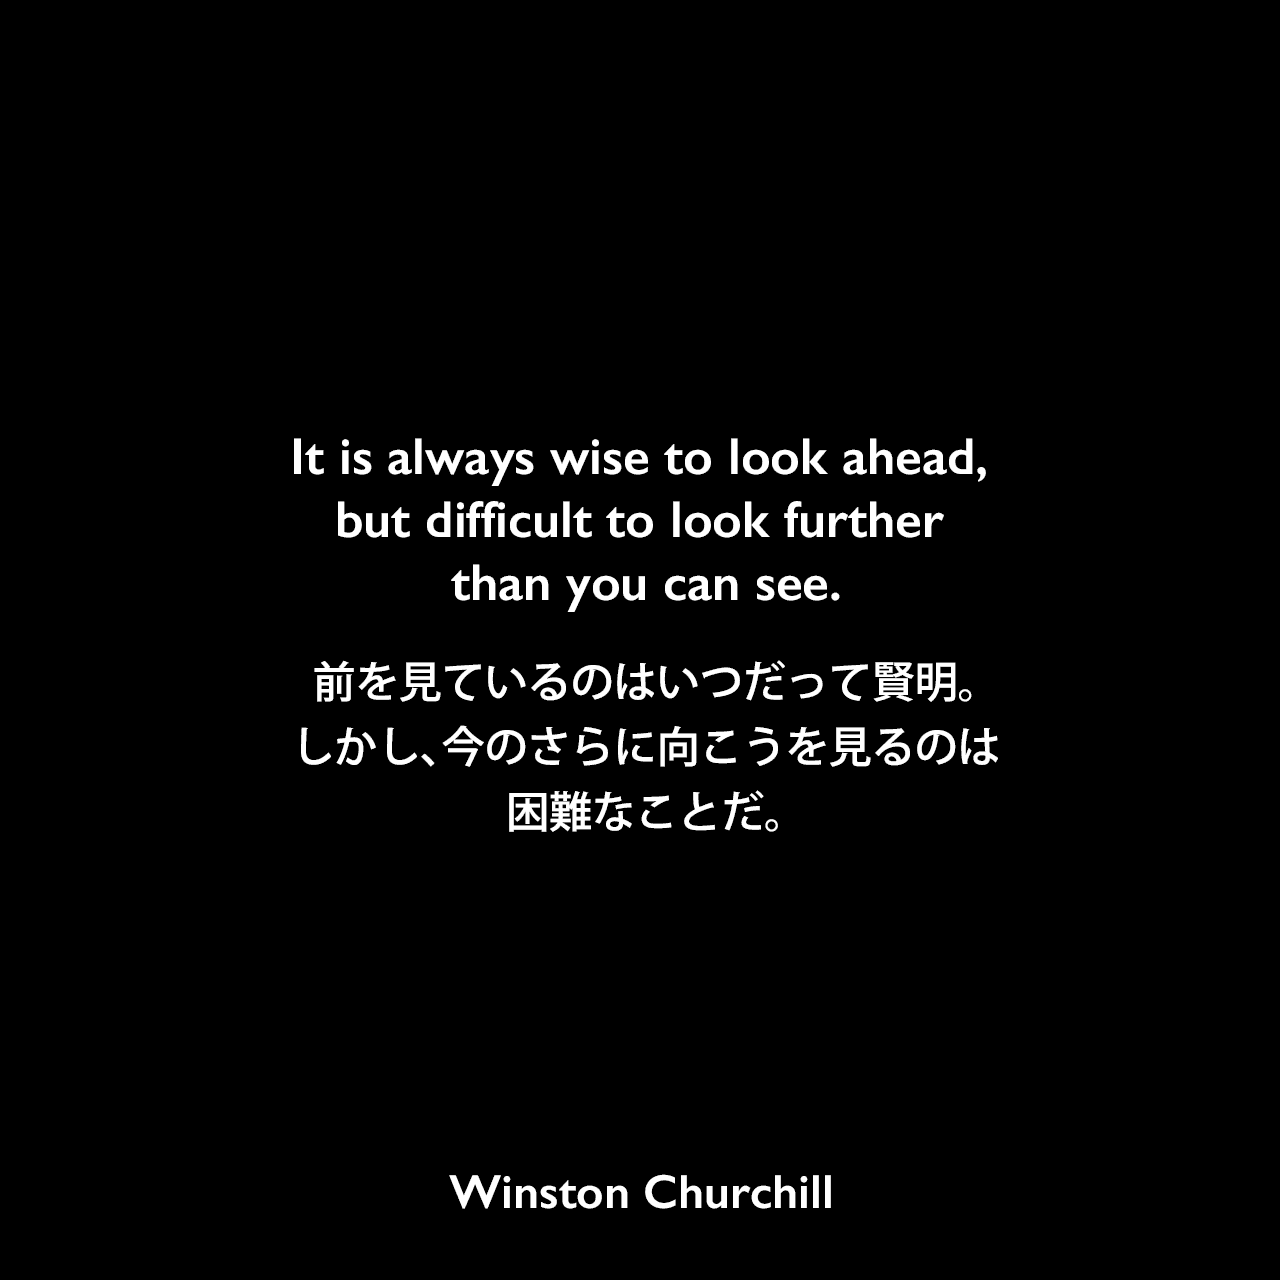 It is always wise to look ahead, but difficult to look further than you can see.前を見ているのはいつだって賢明。しかし、今のさらに向こうを見るのは困難なことだ。Winston Churchill